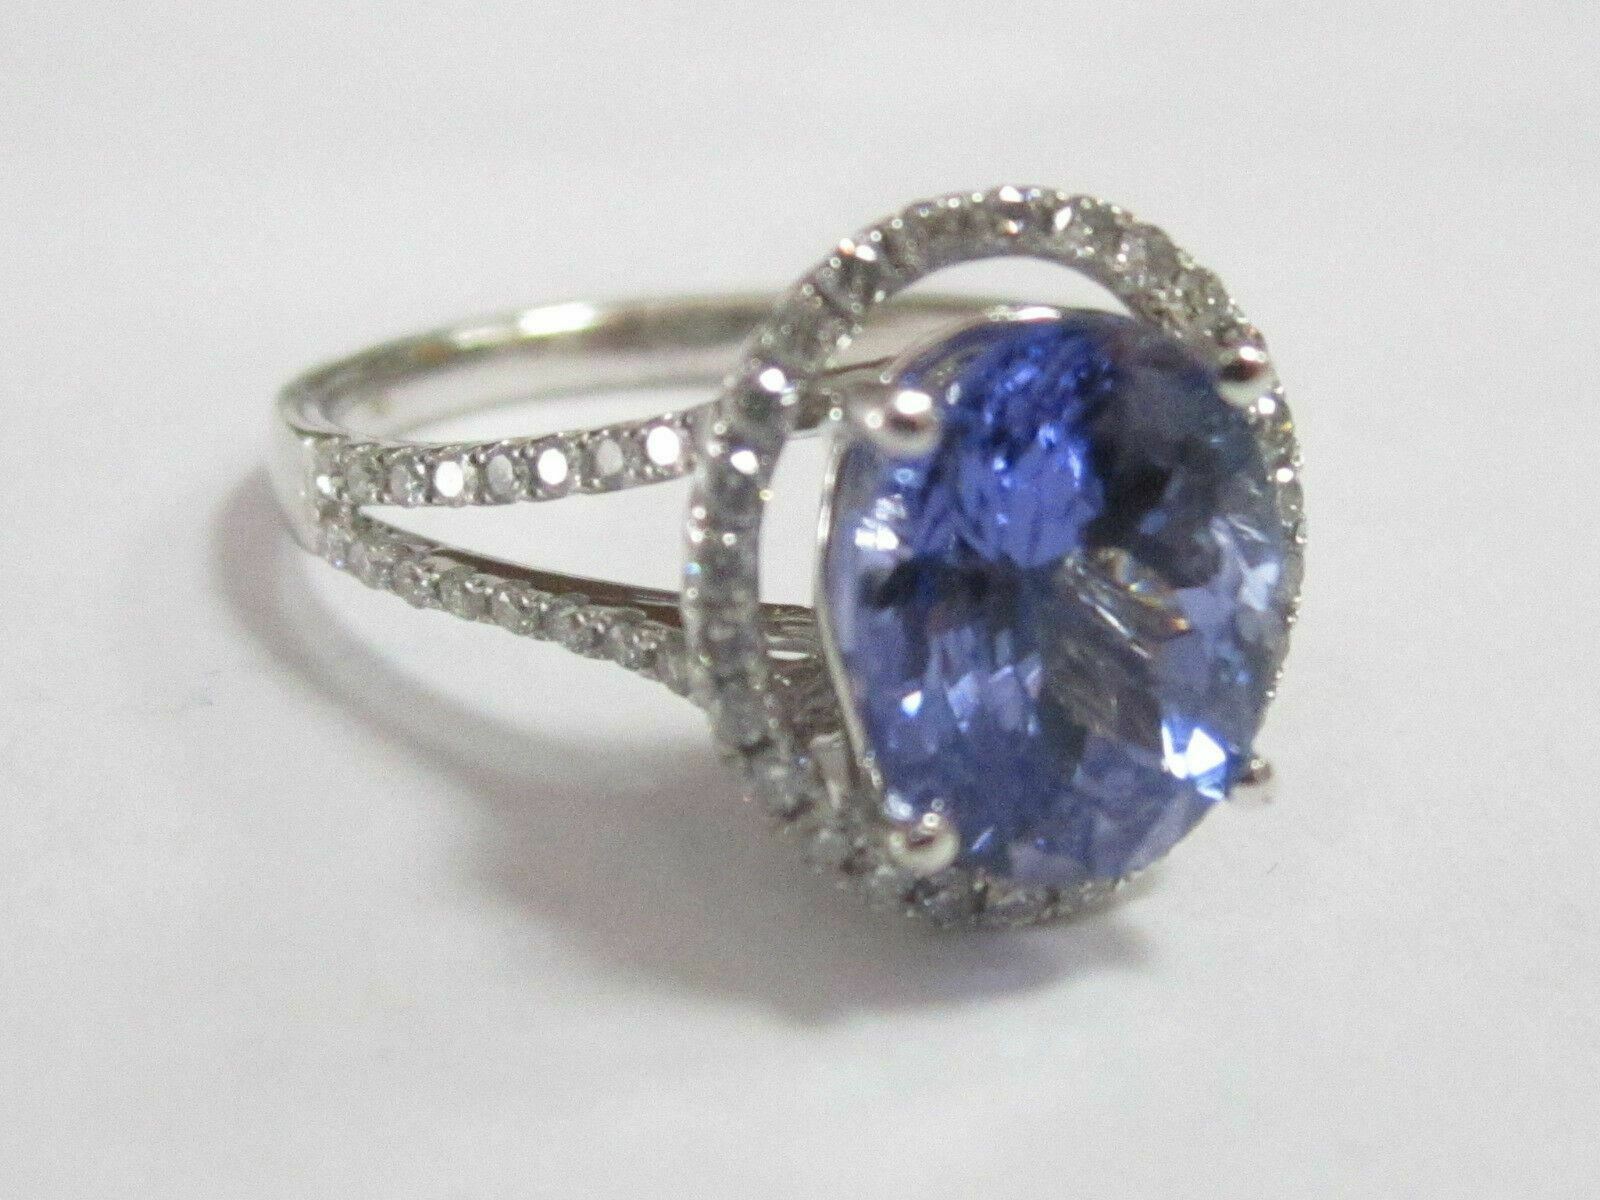 Natural Oval Tanzanite & Diamond Accents Solitaire Ring Size 7 14k White Gold